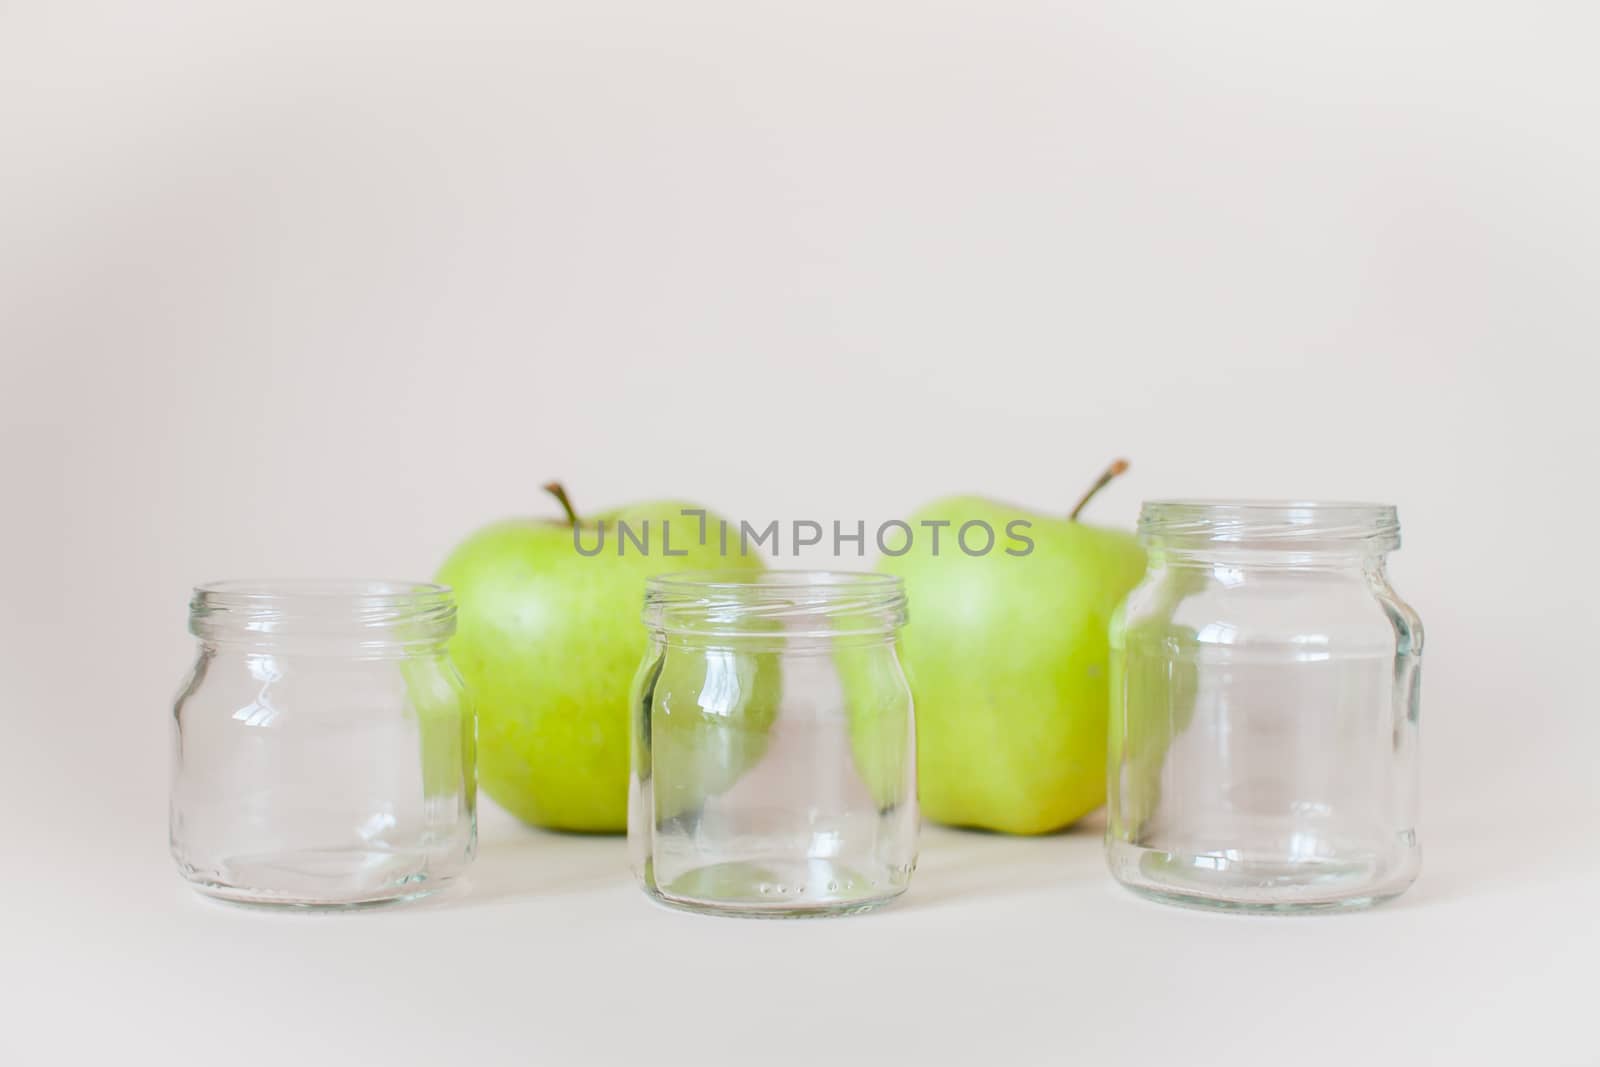 Green ripe apples and empty transparent jars for baby food on a light background